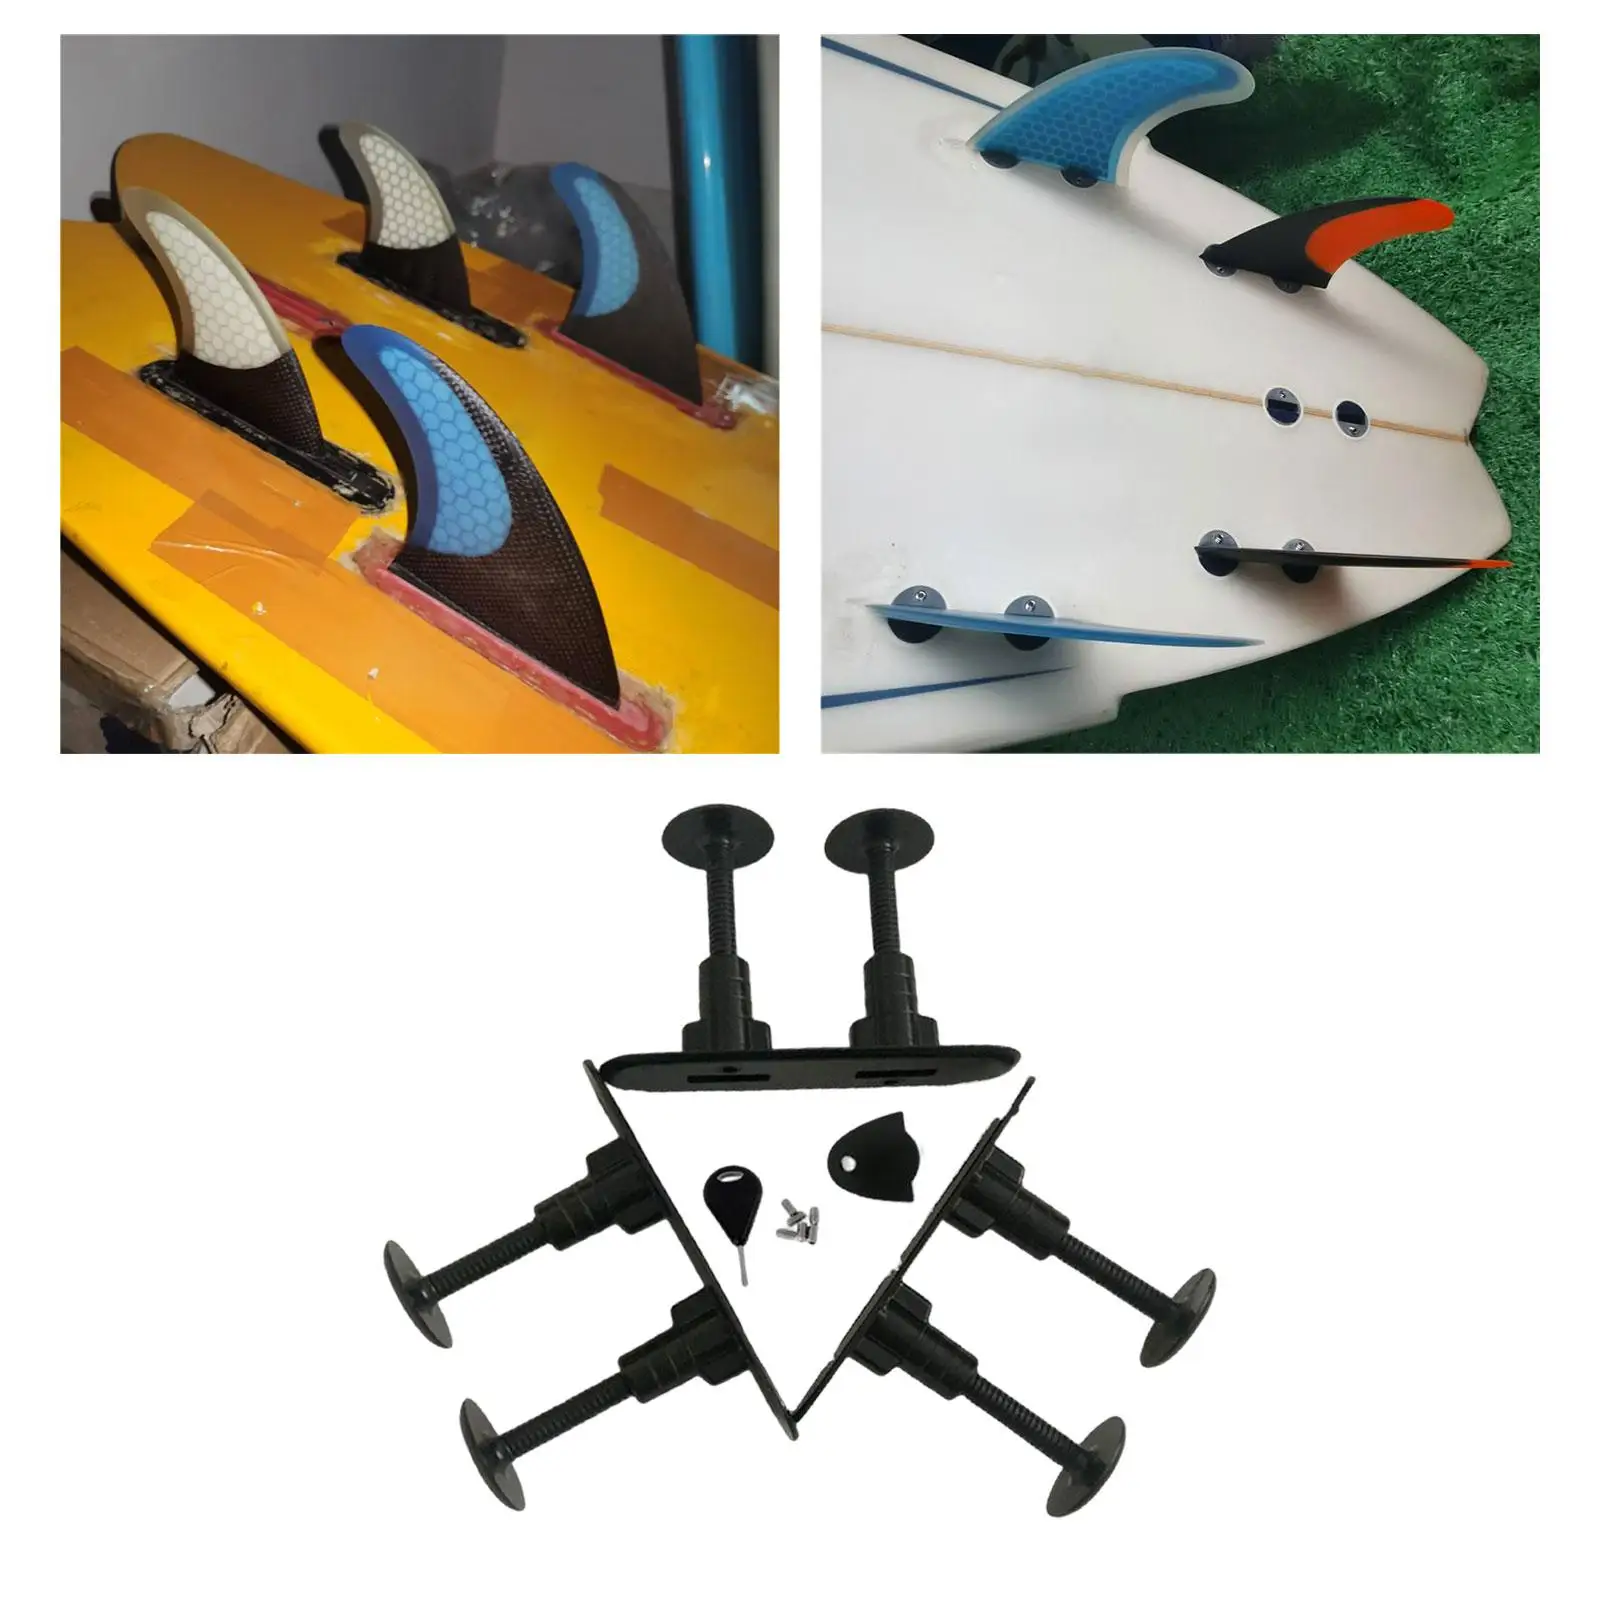 3x Surfboard Fin Plugs Install Base Double Tabs for Softboard Surfboard Fin Boxes Paddleboard